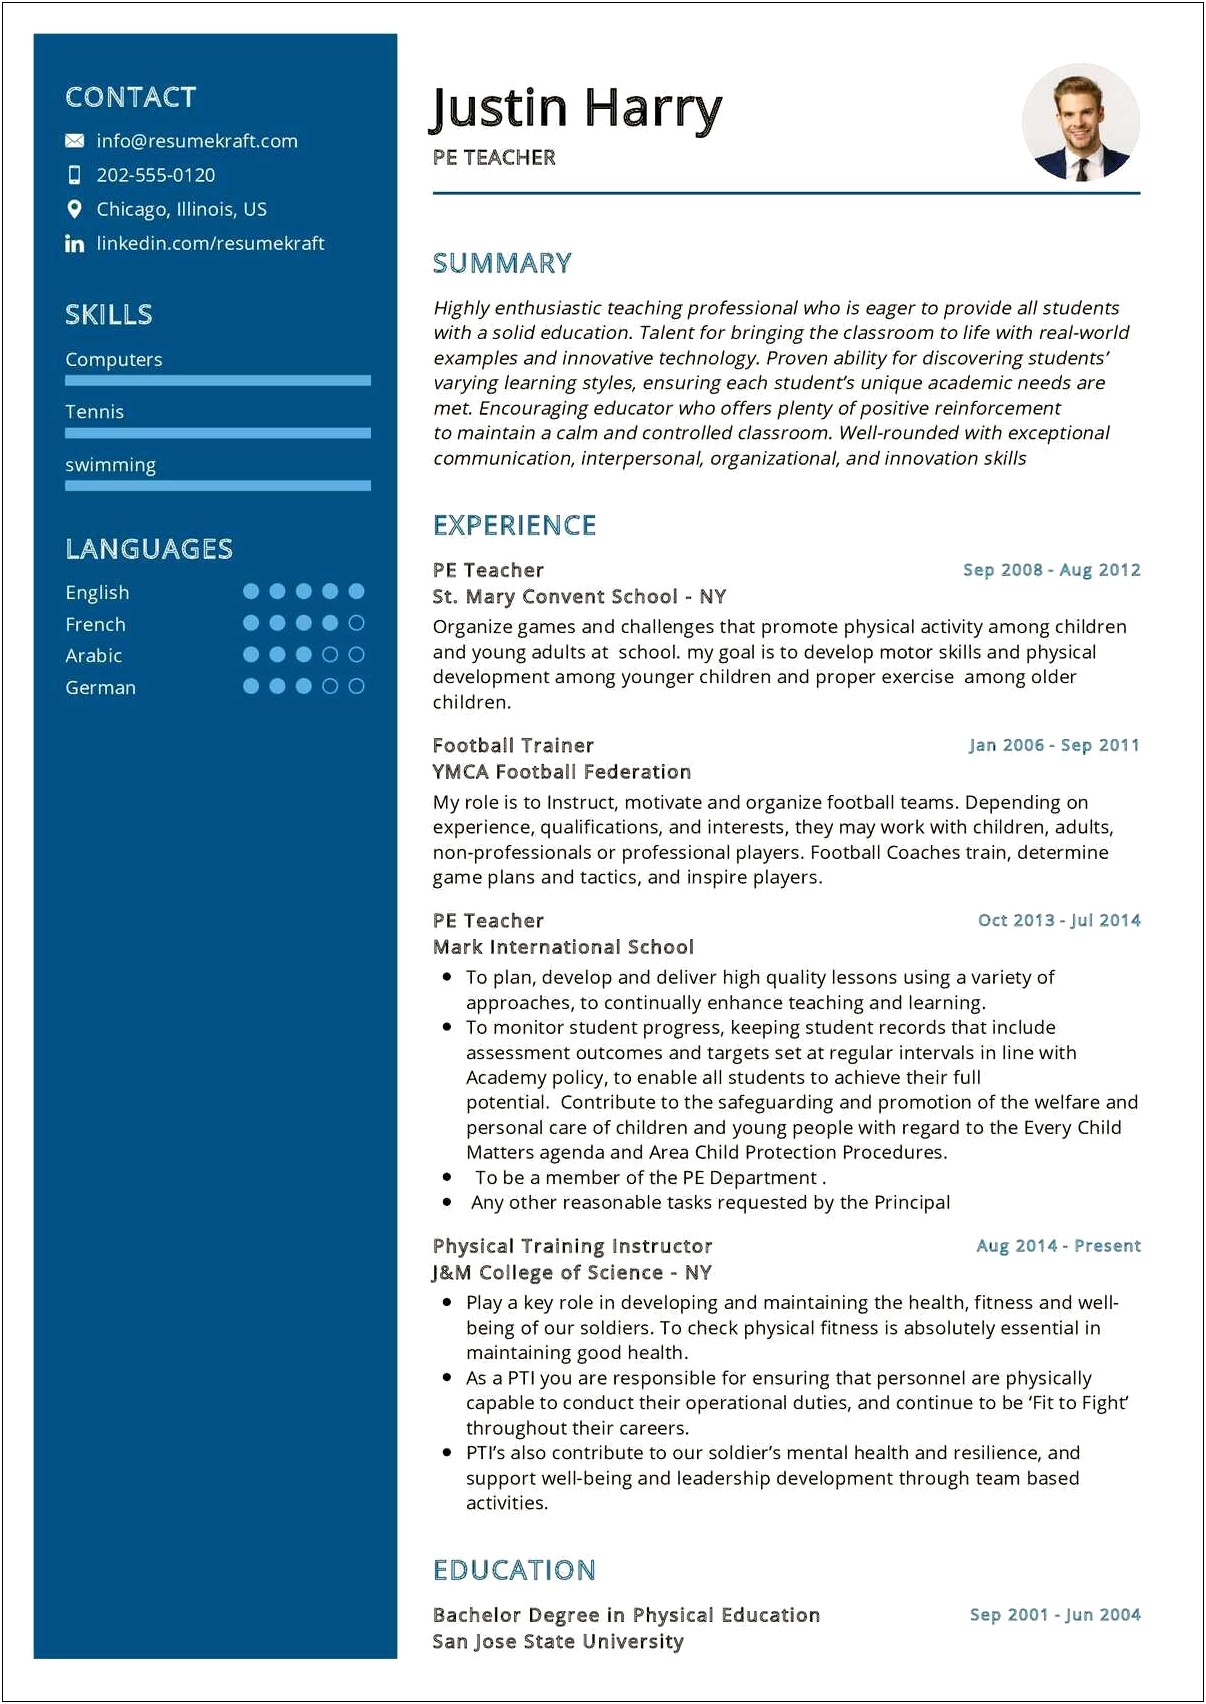 Swimming Instructor Parent And Tot Resume Sample